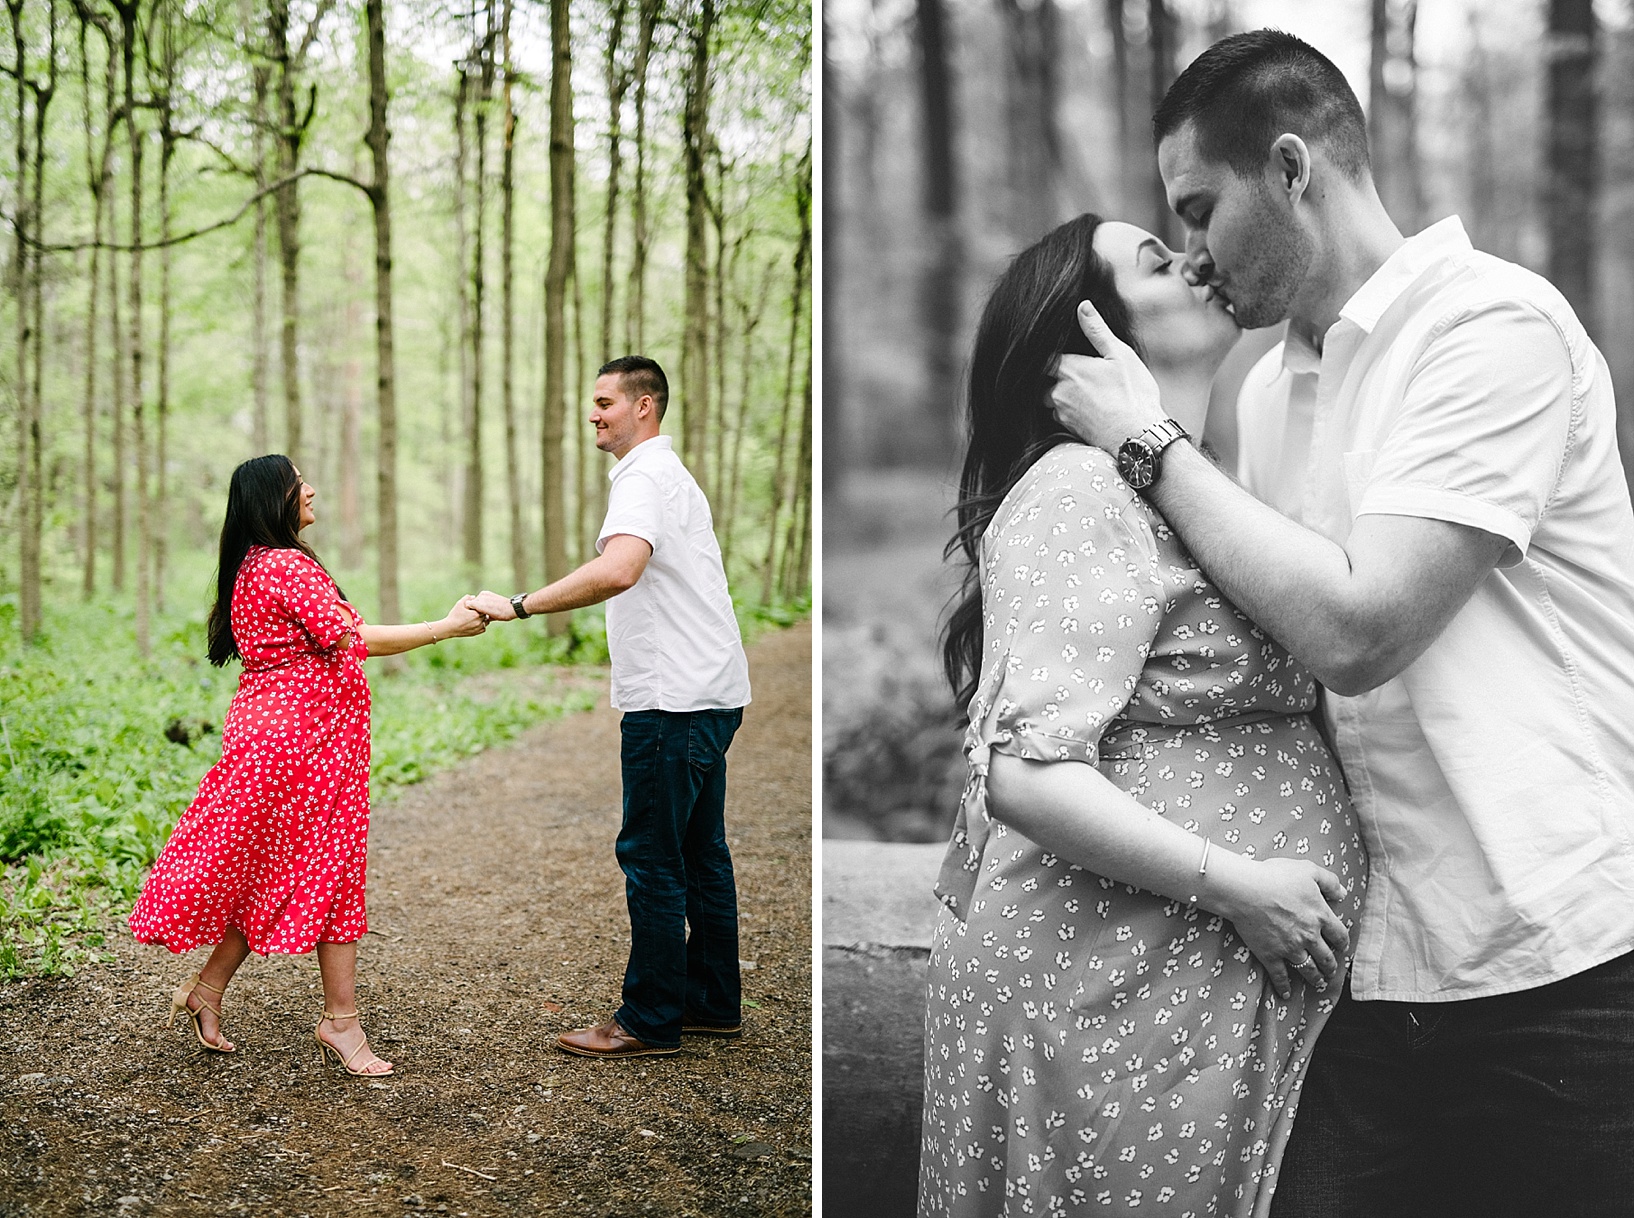 Husband and pregnant wife dance and kiss in woods maternity photography shoot